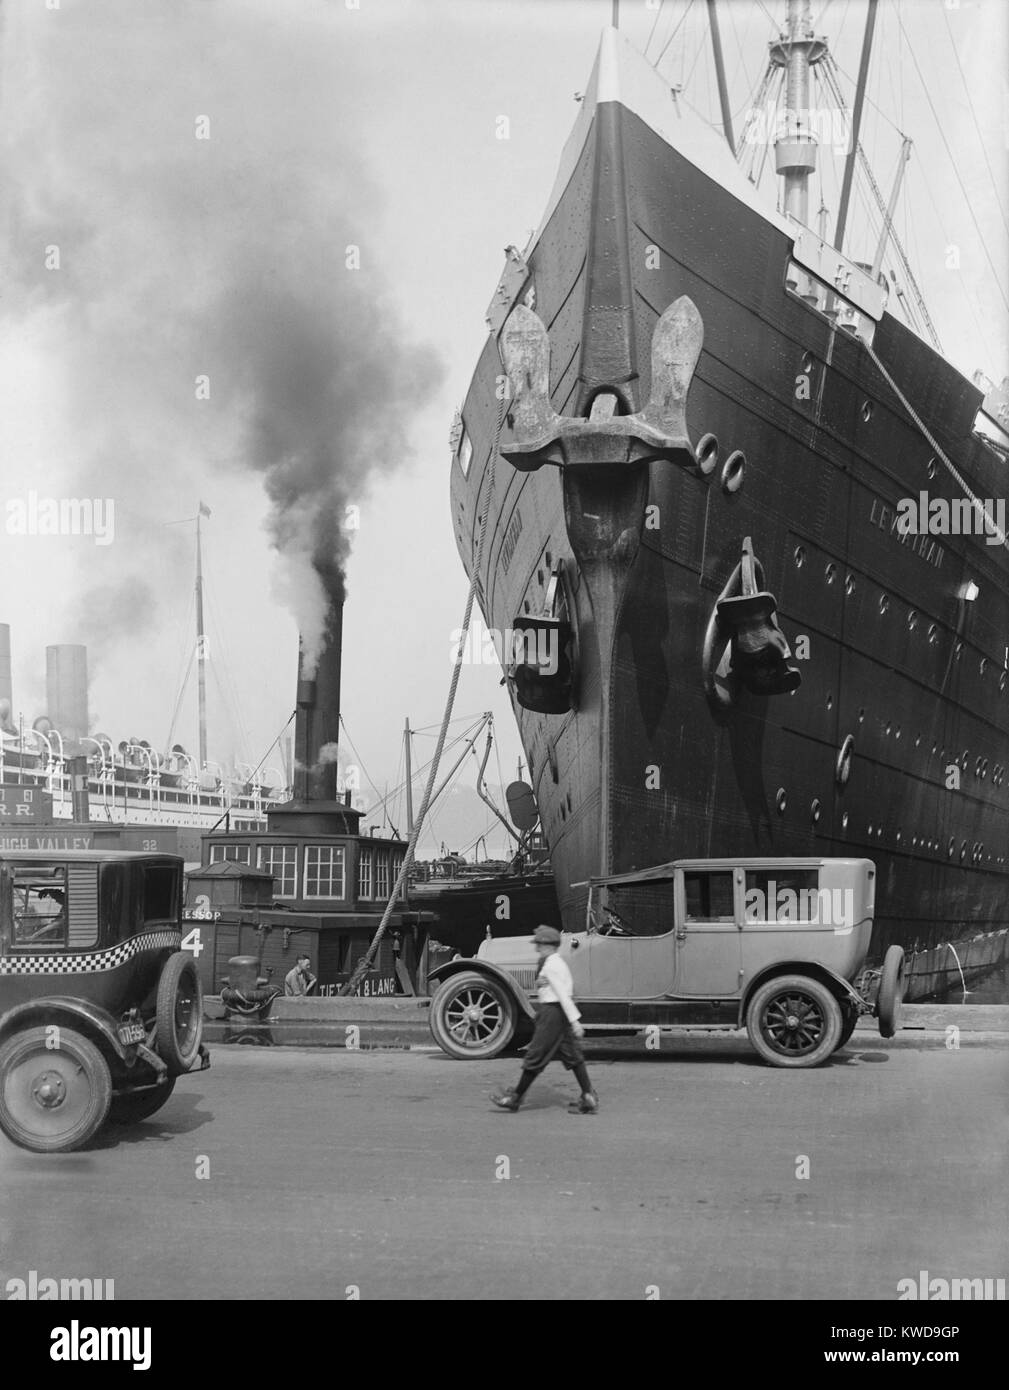 The ocean liner 'Leviathan' at a New York City pier, c. 1920s. She was originally the German flag passenger liner 'Vaterland', but was seized as a troop transport from April 1917-1919. She remained in political limbo from 1919 until 1922, when she was modernized into the largest and fastest ship of the U.S. merchant marine (BSLOC 2016 10 182) Stock Photo